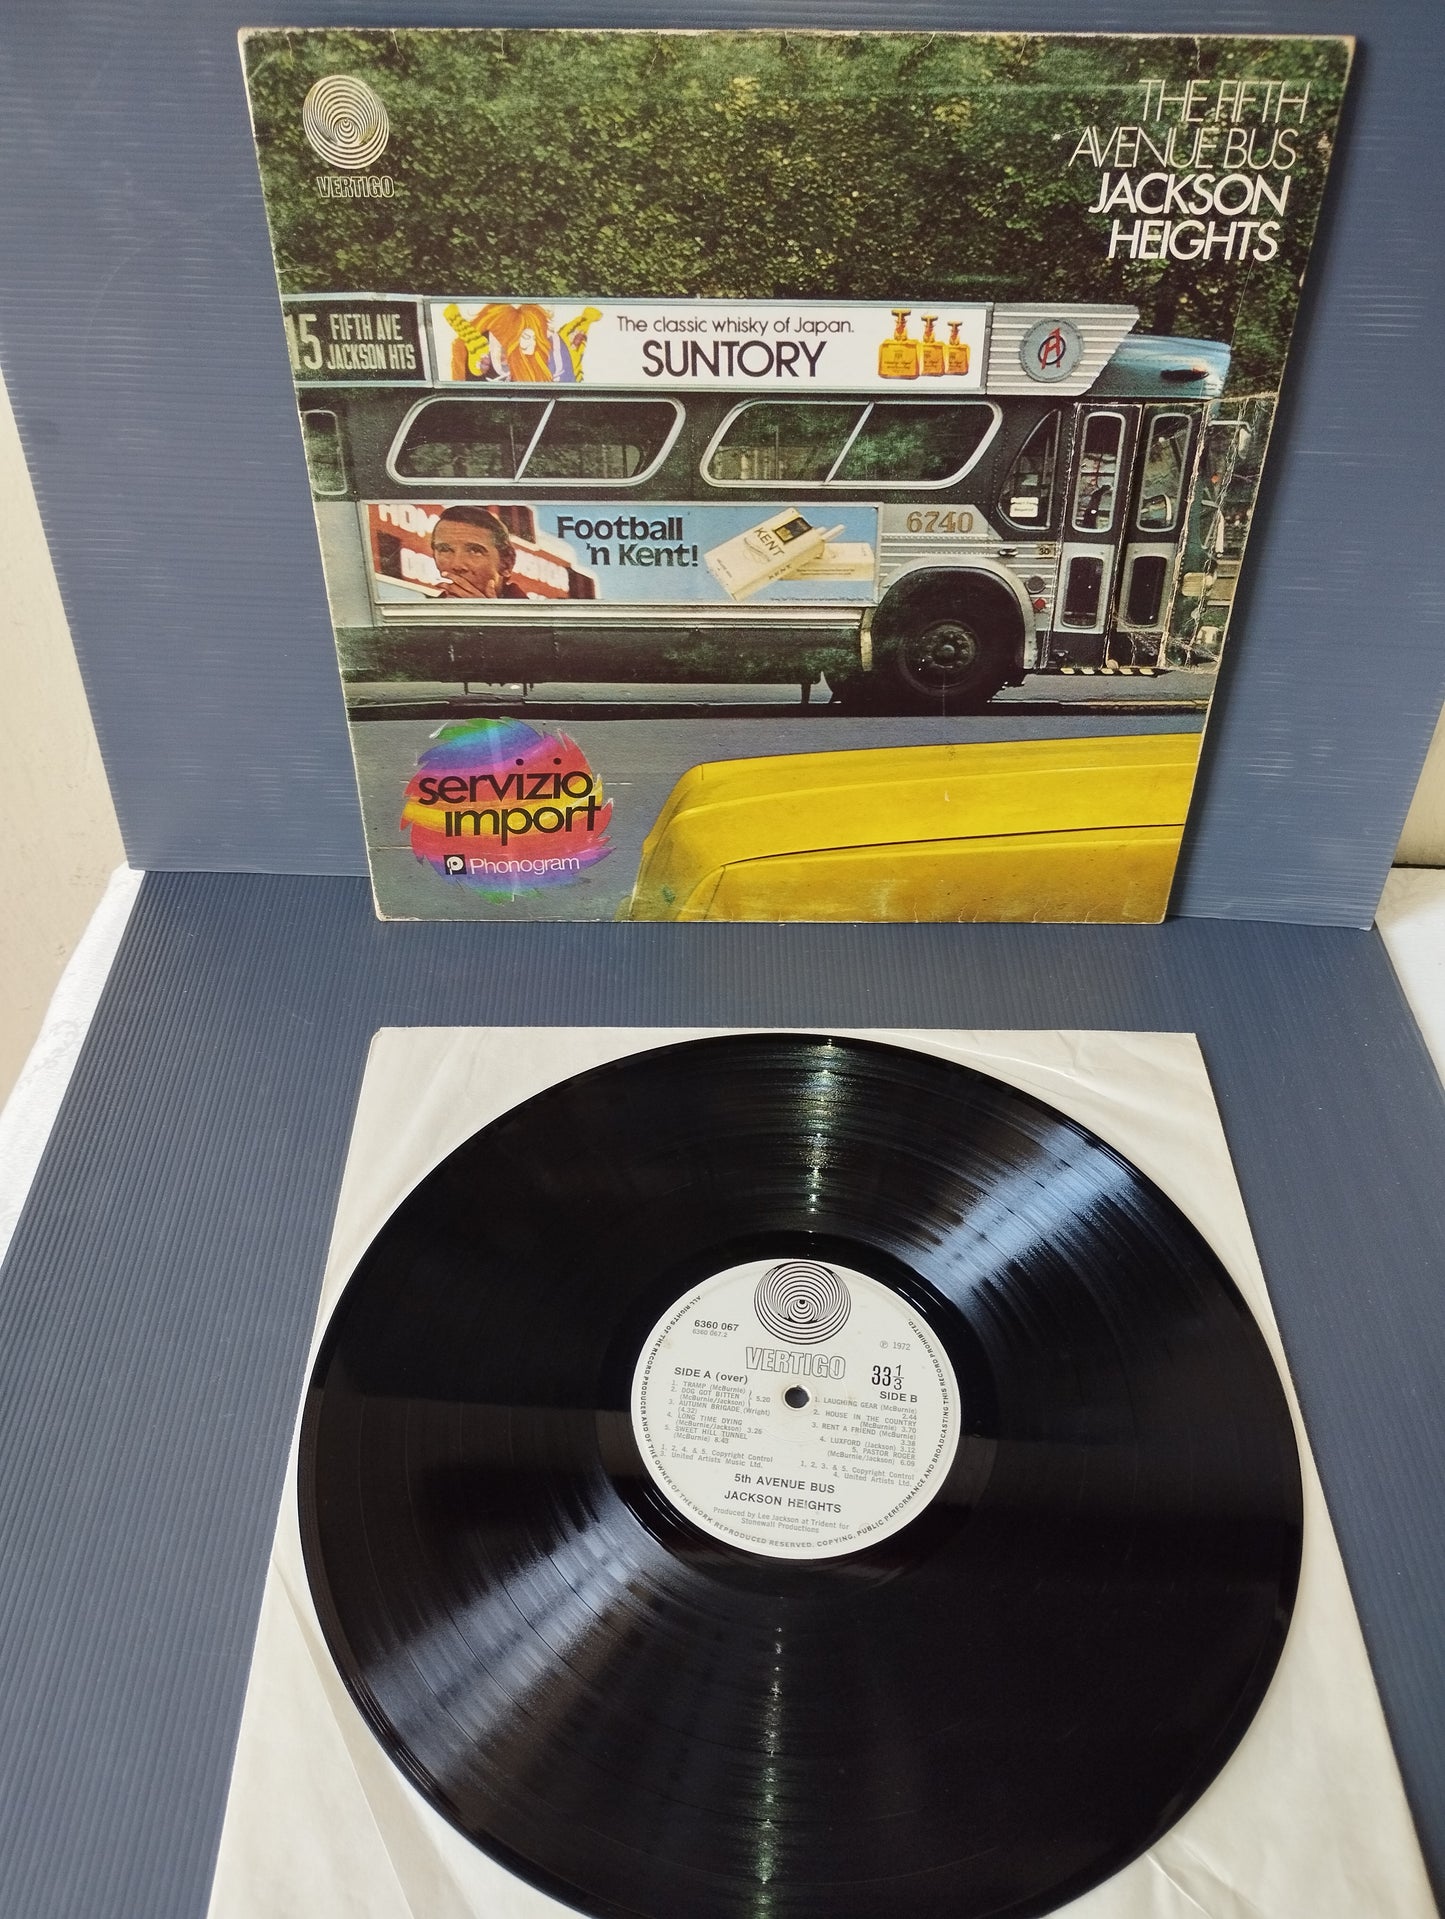 The Fifth Avenue Bus" Jackson Heights LP 33 rpm
 Published in 1972 by Vertigo code 6360 067
 First printing